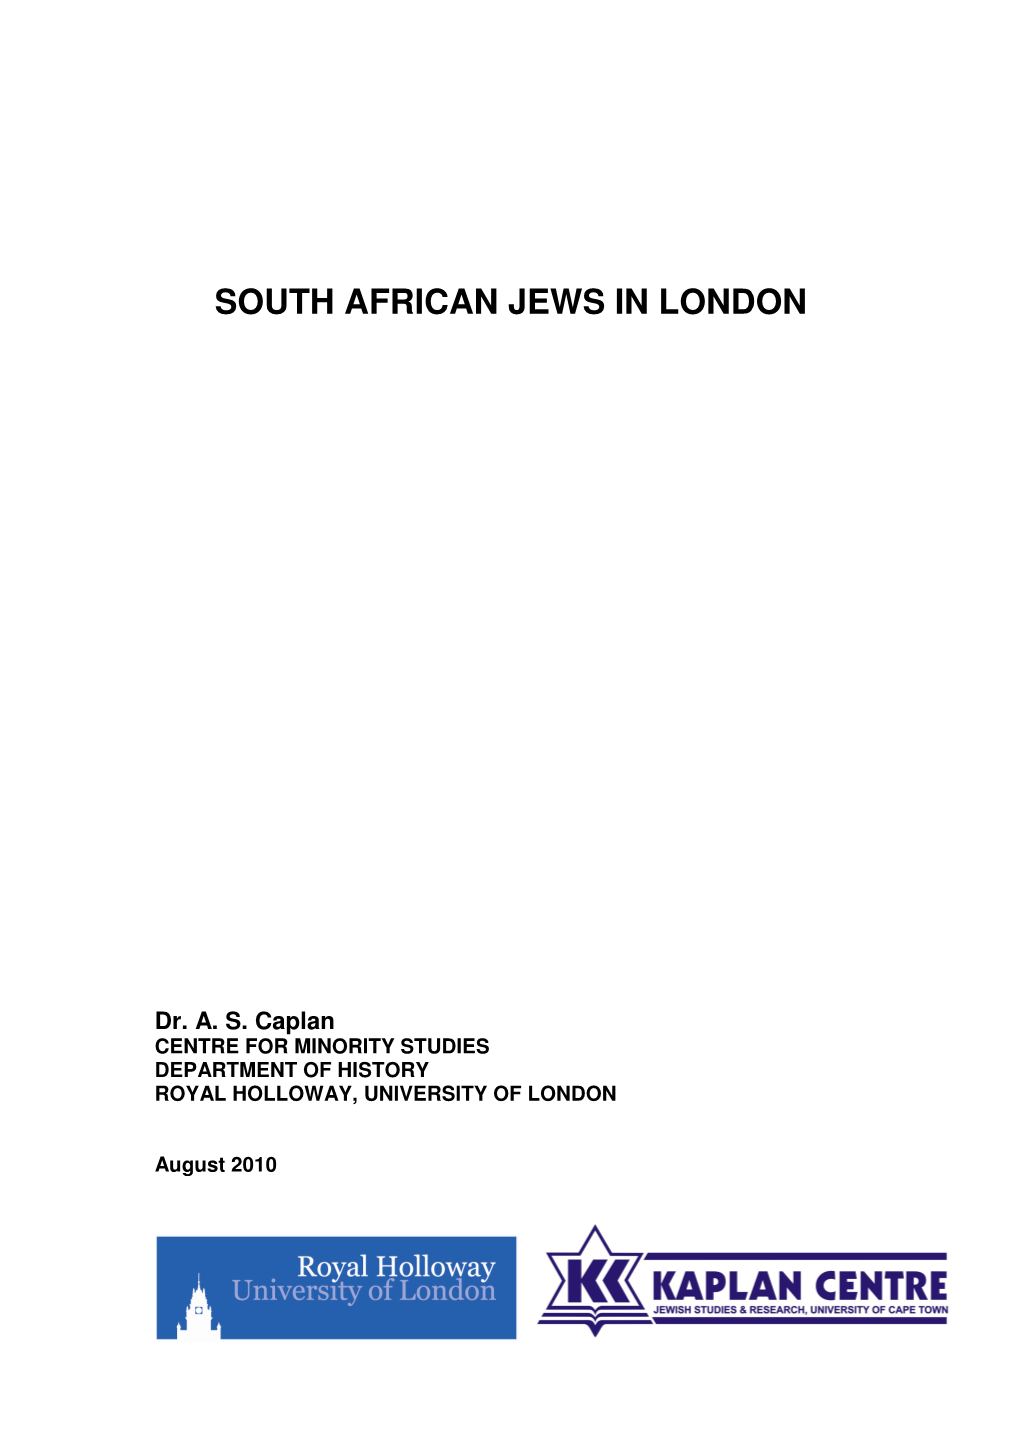 South African Jews in London